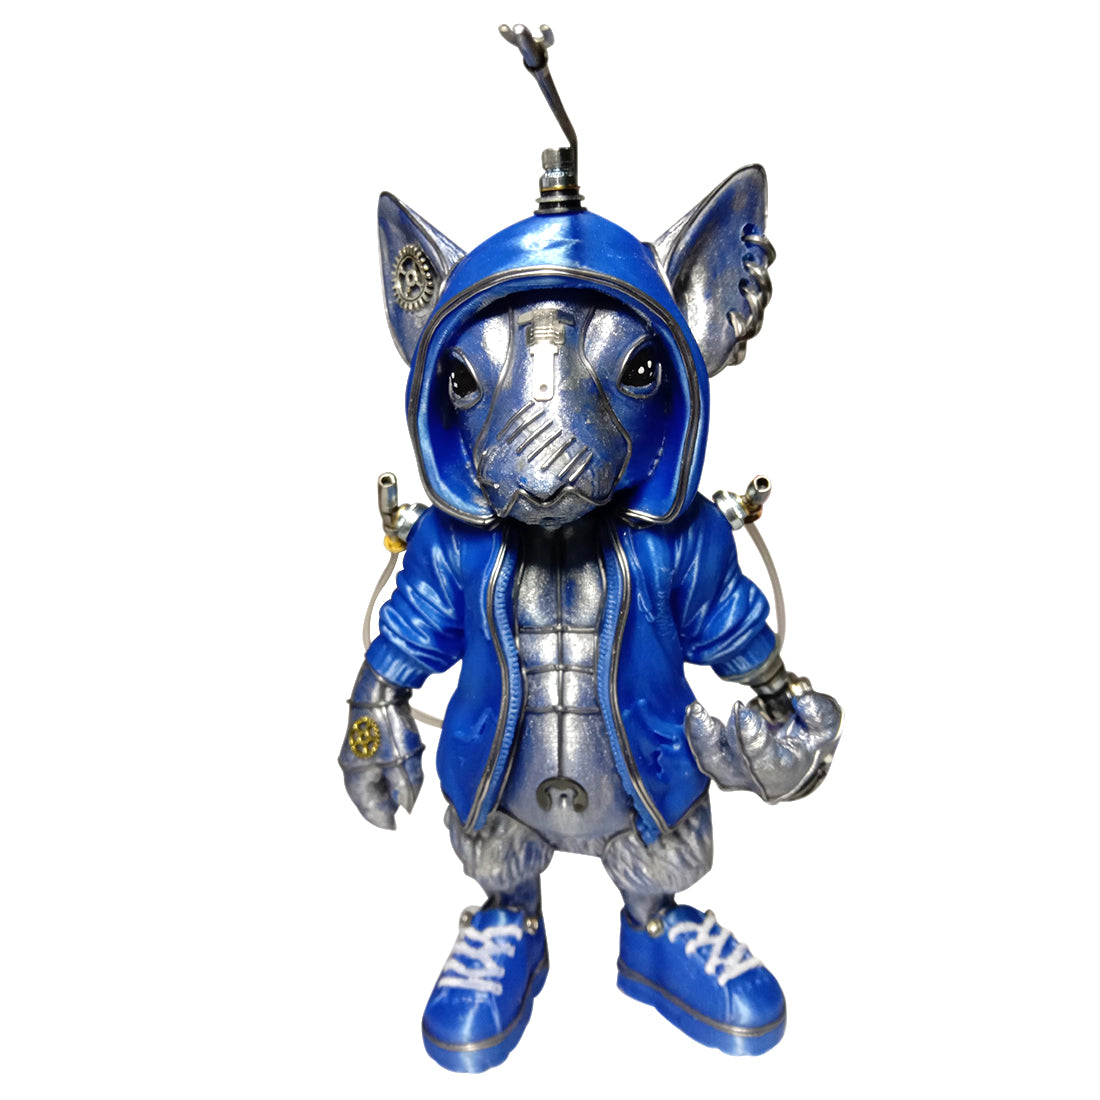 3D Metal Steampunk Mouse with Blue Jacket Animal Sculpture Model Assembled